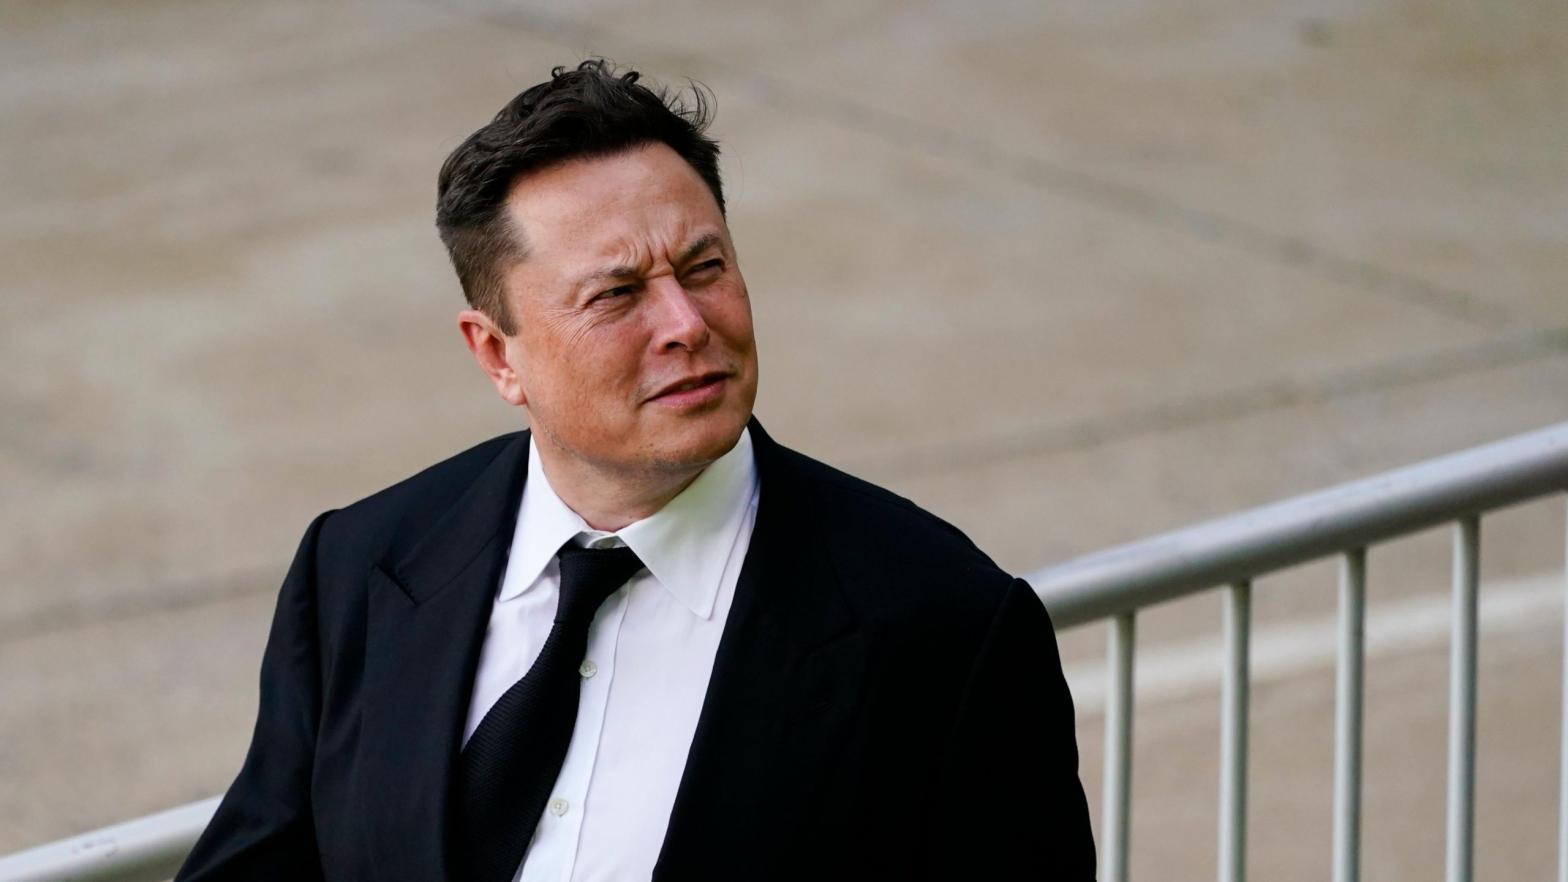 File photo of Elon Musk, the wealthiest person in the world, in Delaware over the summer defending against a lawsuit brought by SolarCity shareholders. (Photo: Matt Rourke, AP)